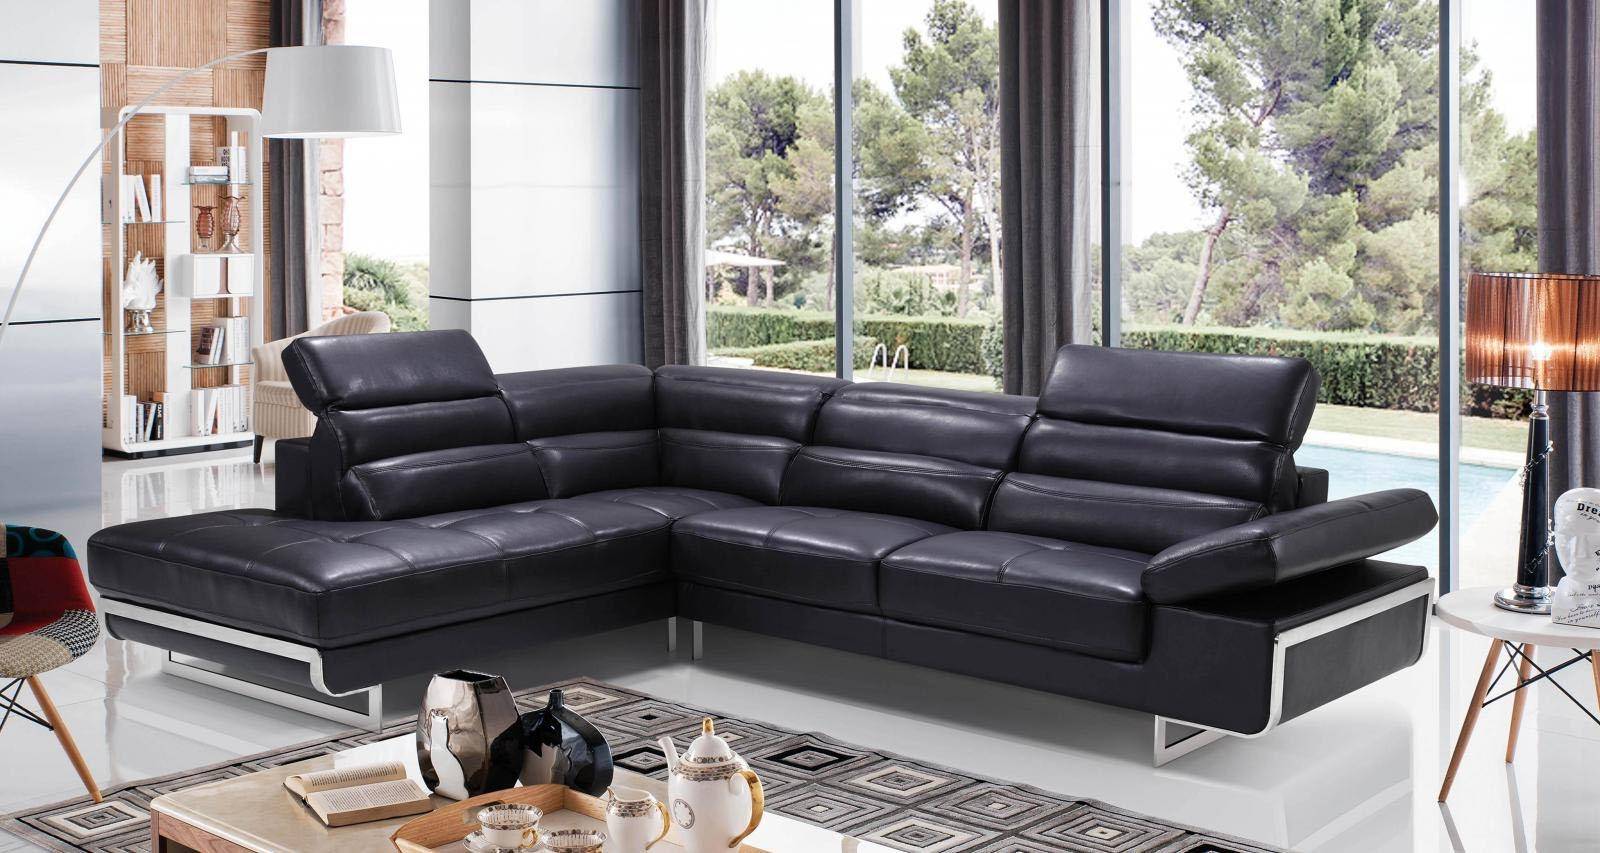 Esf 2347 Sectional Sofa Left Hand, Black Leather Sectional Couches